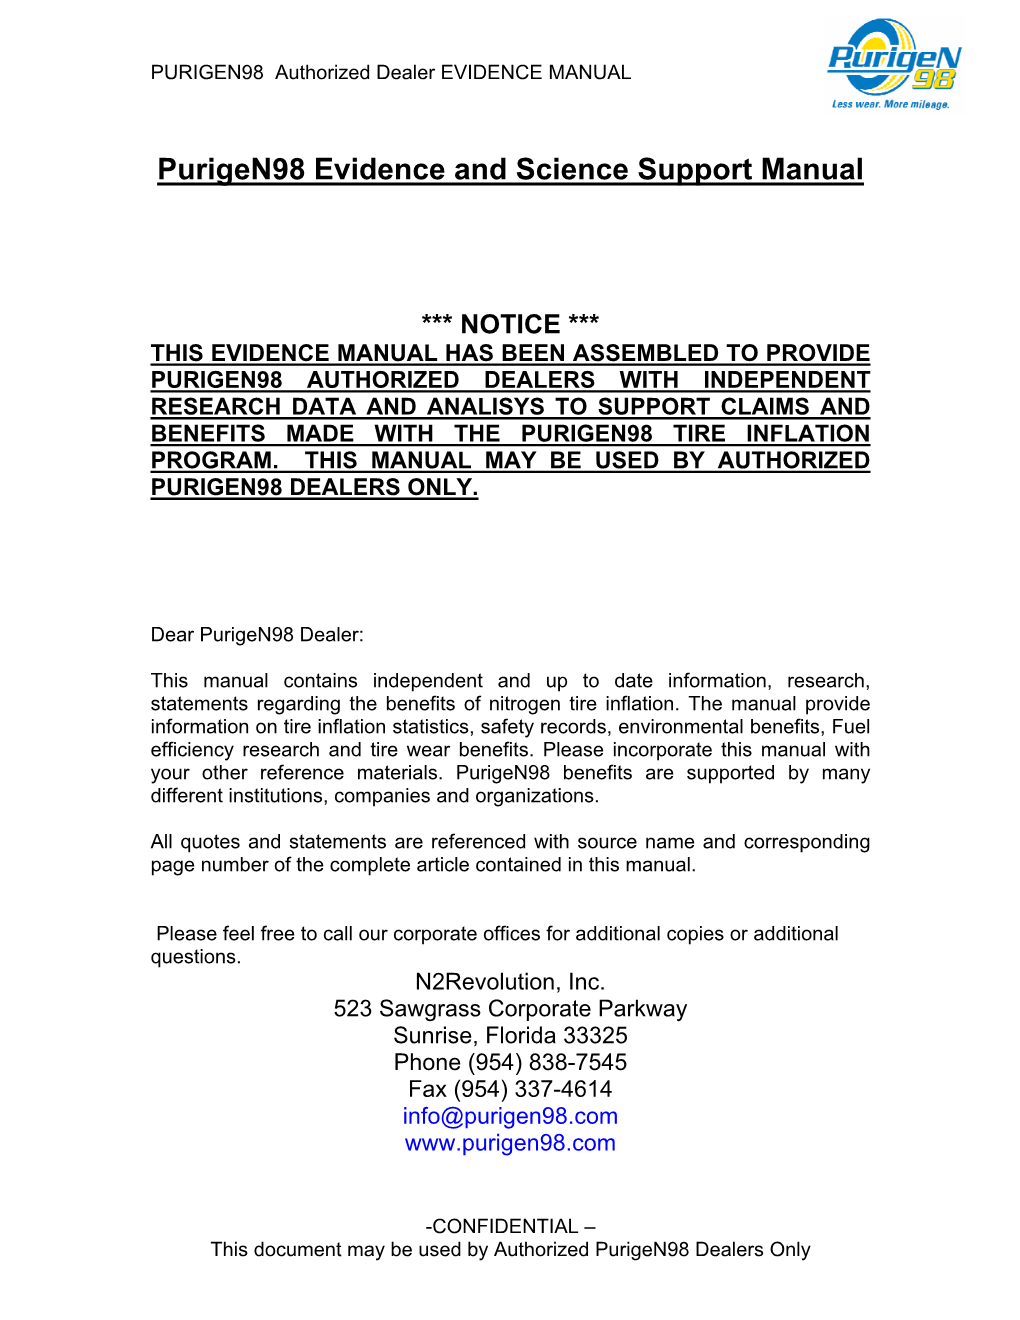 Purigen98 Evidence and Science Support Manual